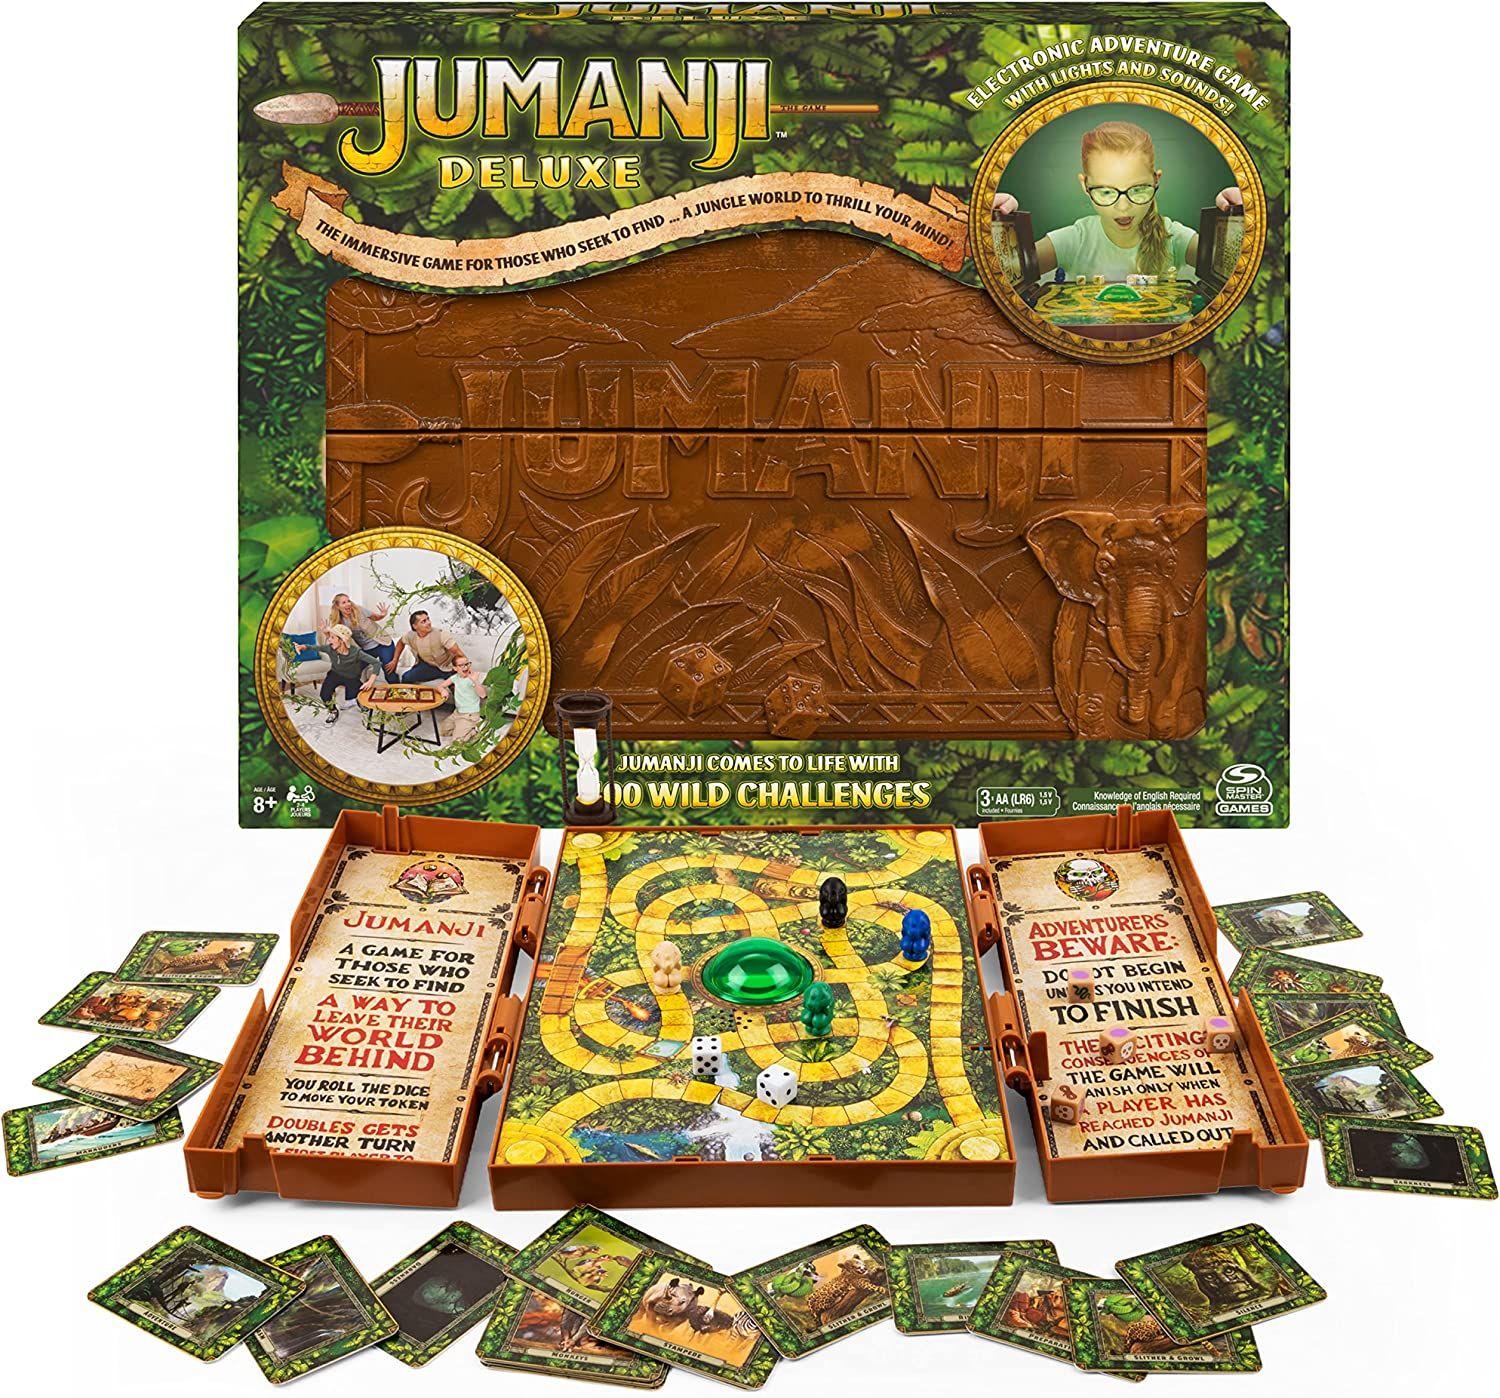 Jumanji is one of the most beautiful board games